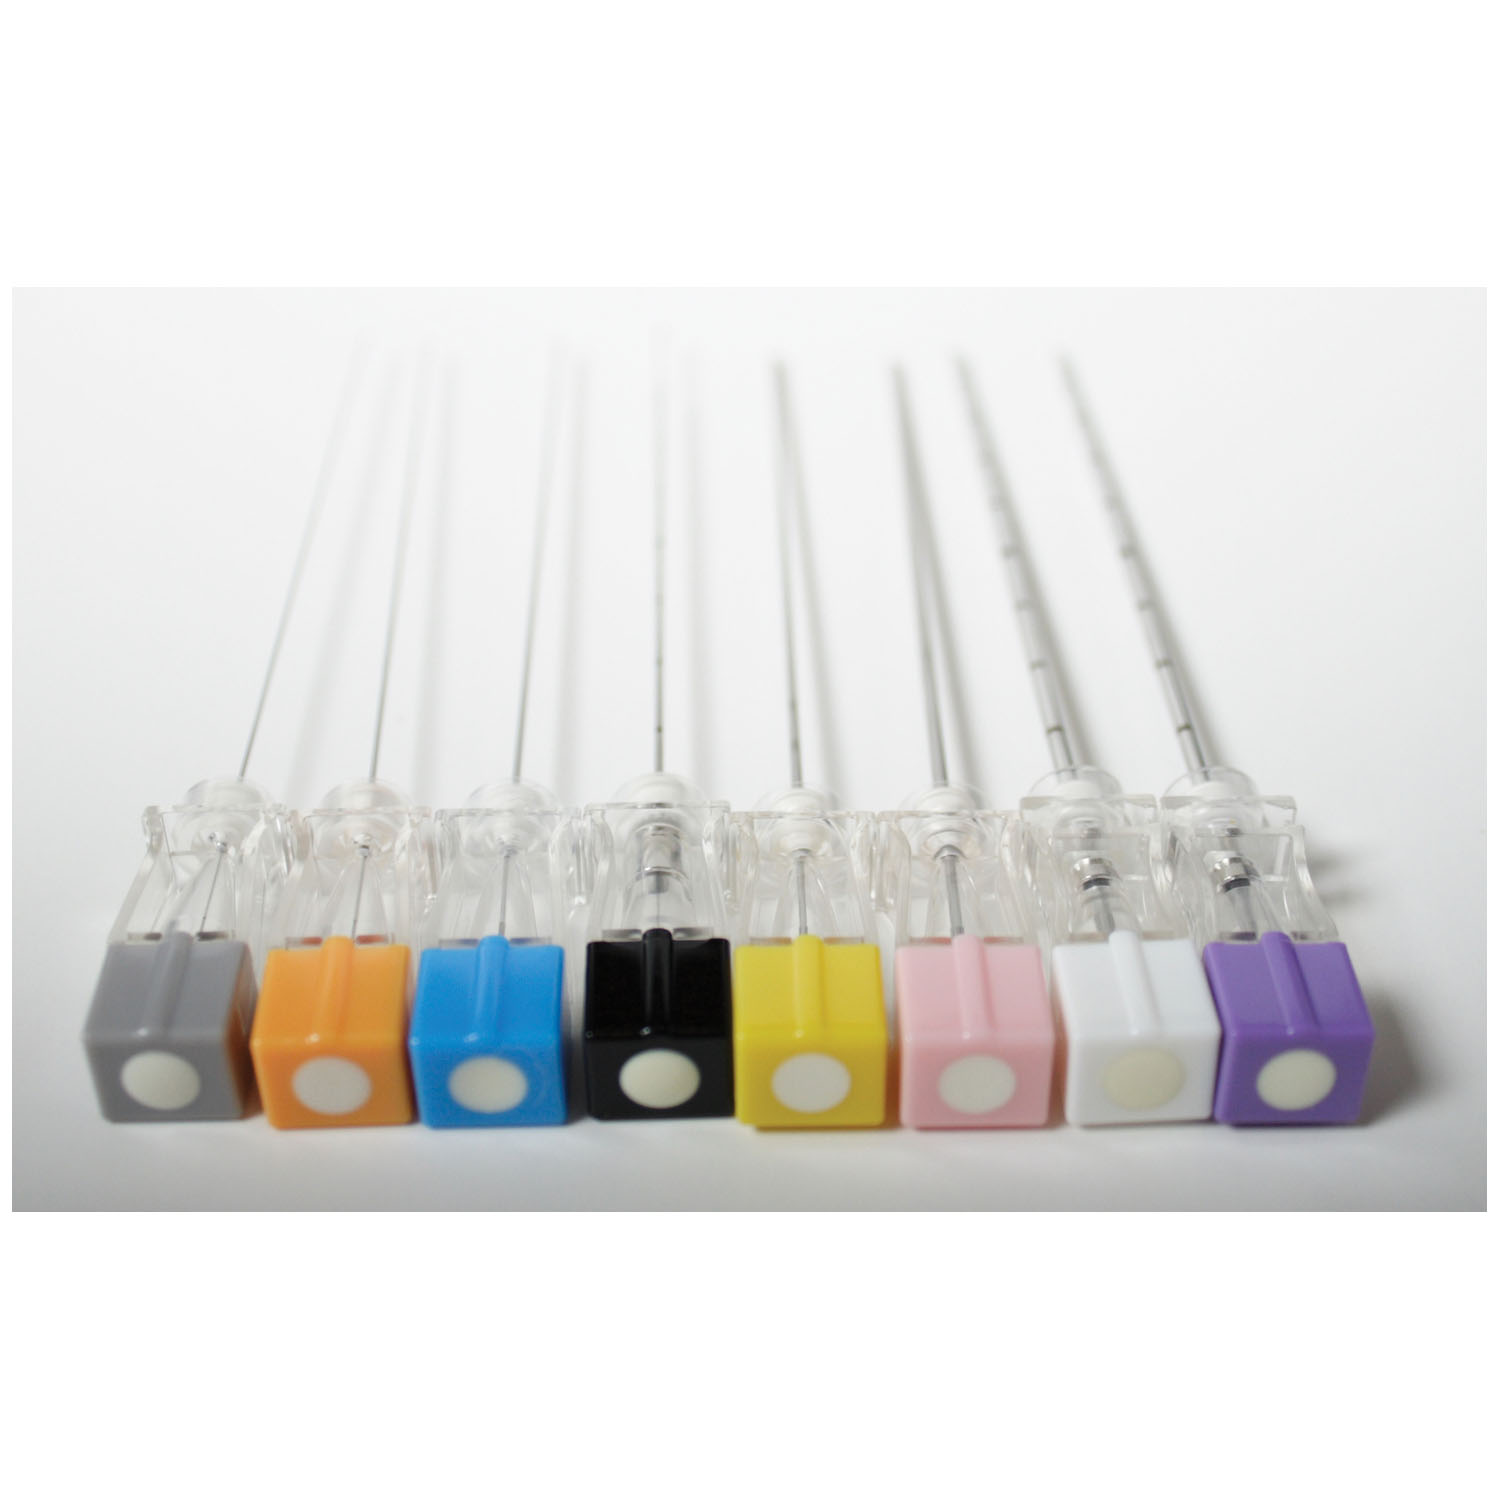 MYCO RELI PENCIL POINT SPINAL NEEDLES : PP27G351 BX $130.78 Stocked